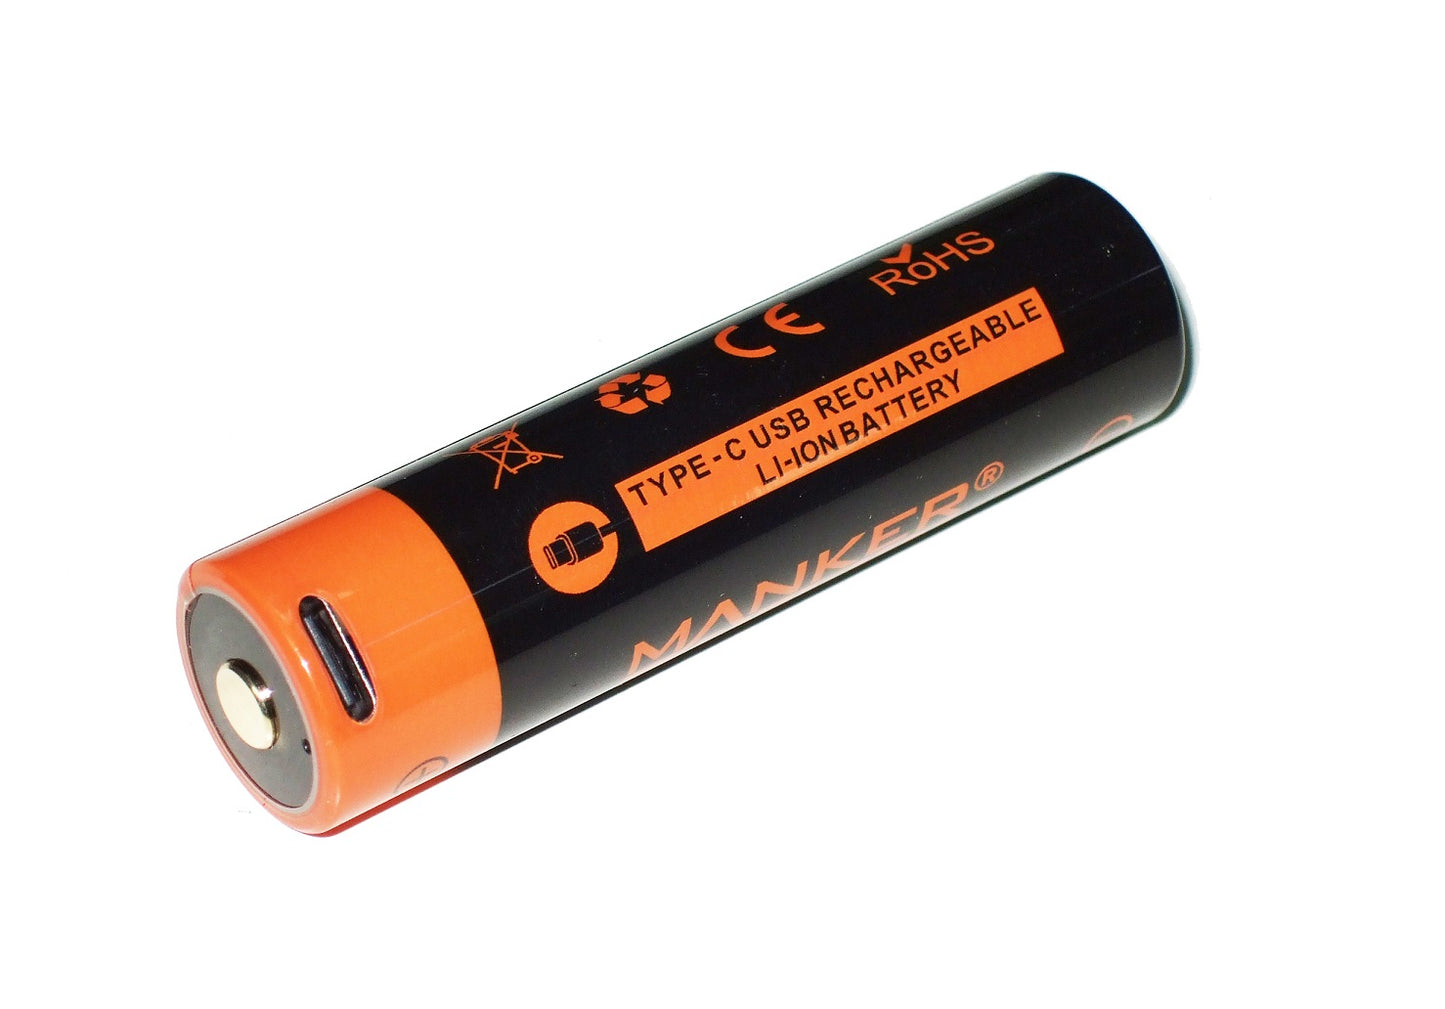 New Manker 18650 3000mAh 3.6V USB-C Button Top Rechargeable Battery Cell